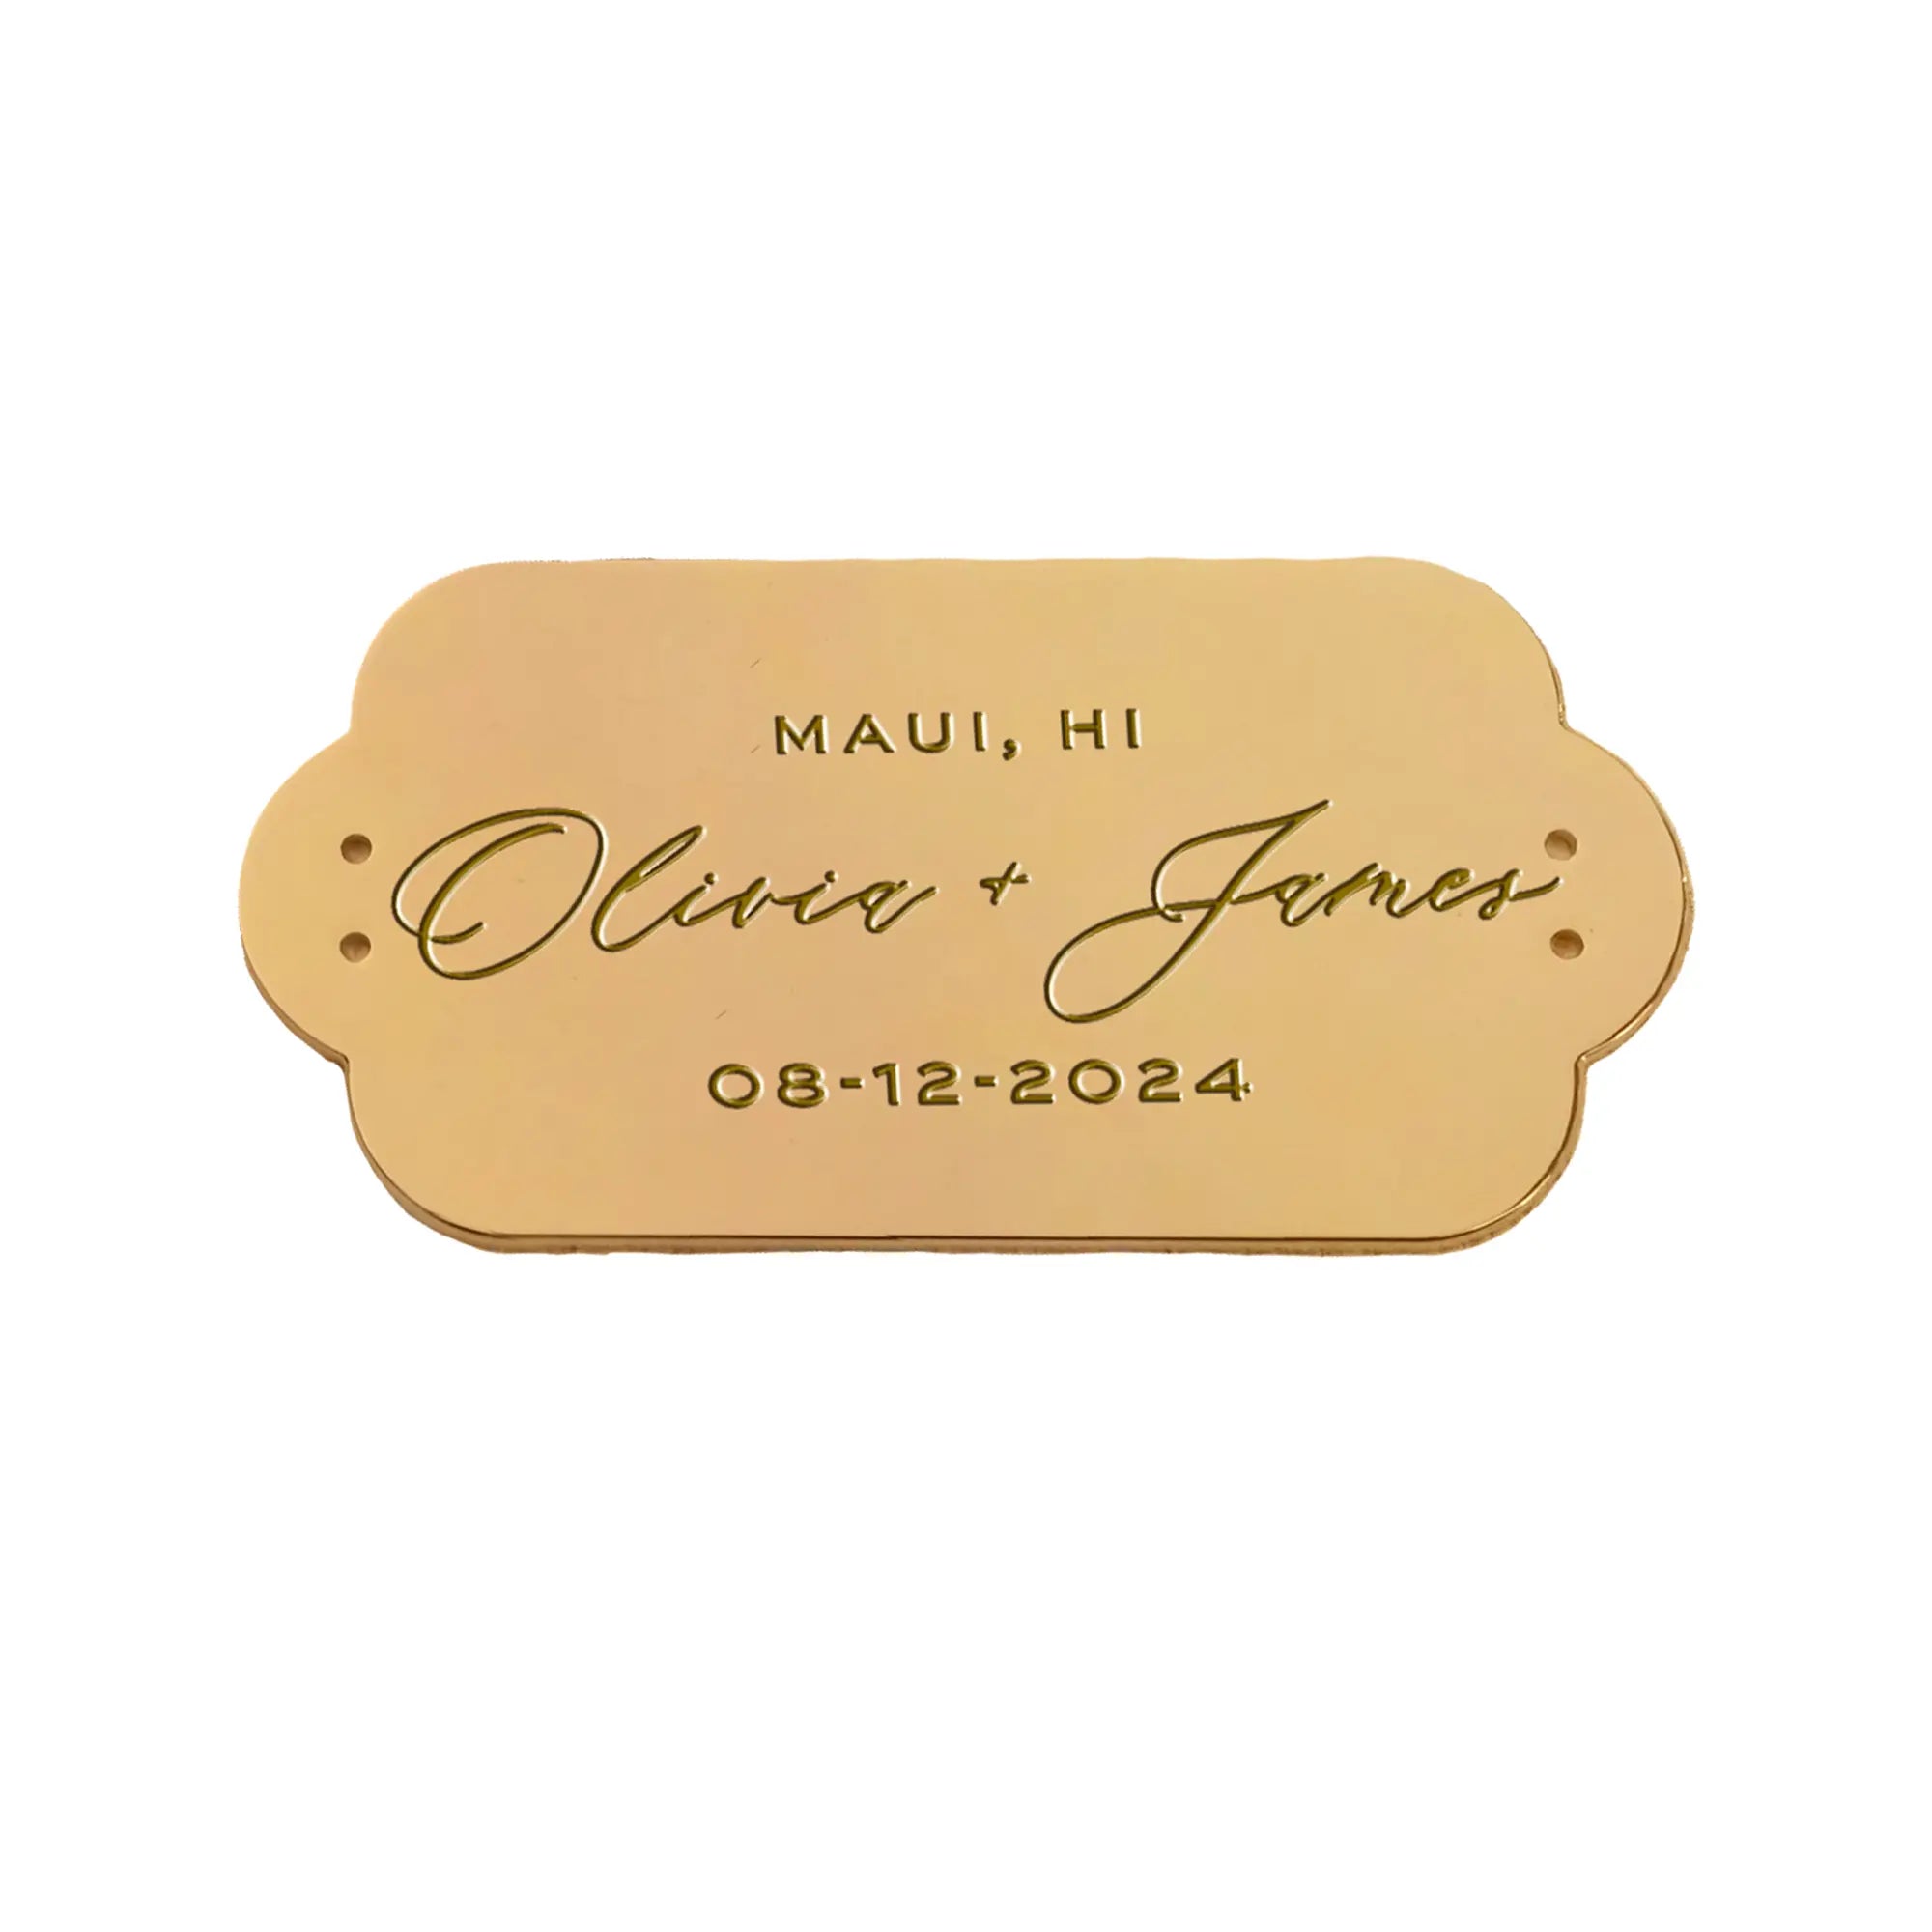 Gold-colored Personalized Plaque Sentiment Engraving with &quot;maui, hi, olivia + james, 08-12-2024&quot; engraved on it from The Bella Rosa Collection.